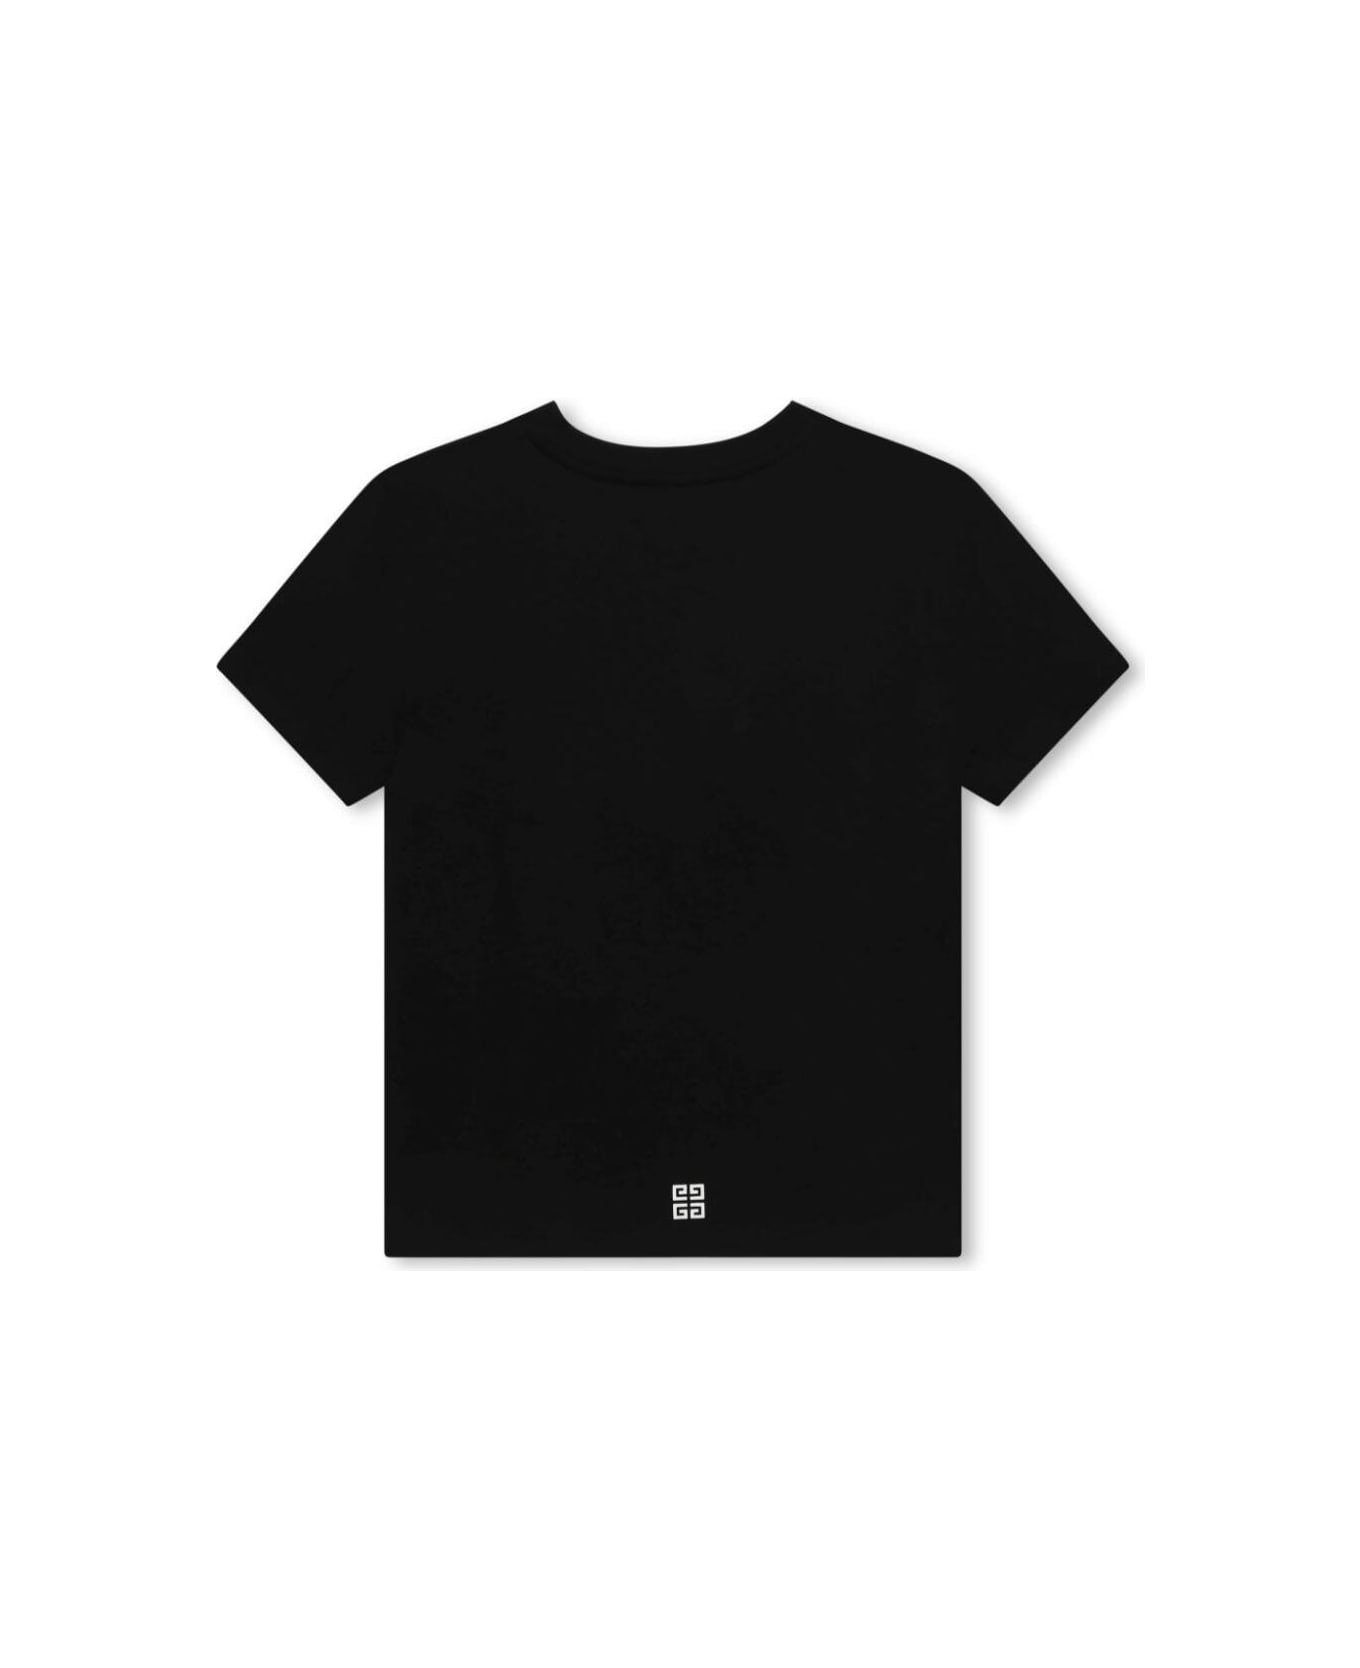 Givenchy Black Crewneck T-shirt With Contrasting Logo Lettering Print In Cotton Boy - Black